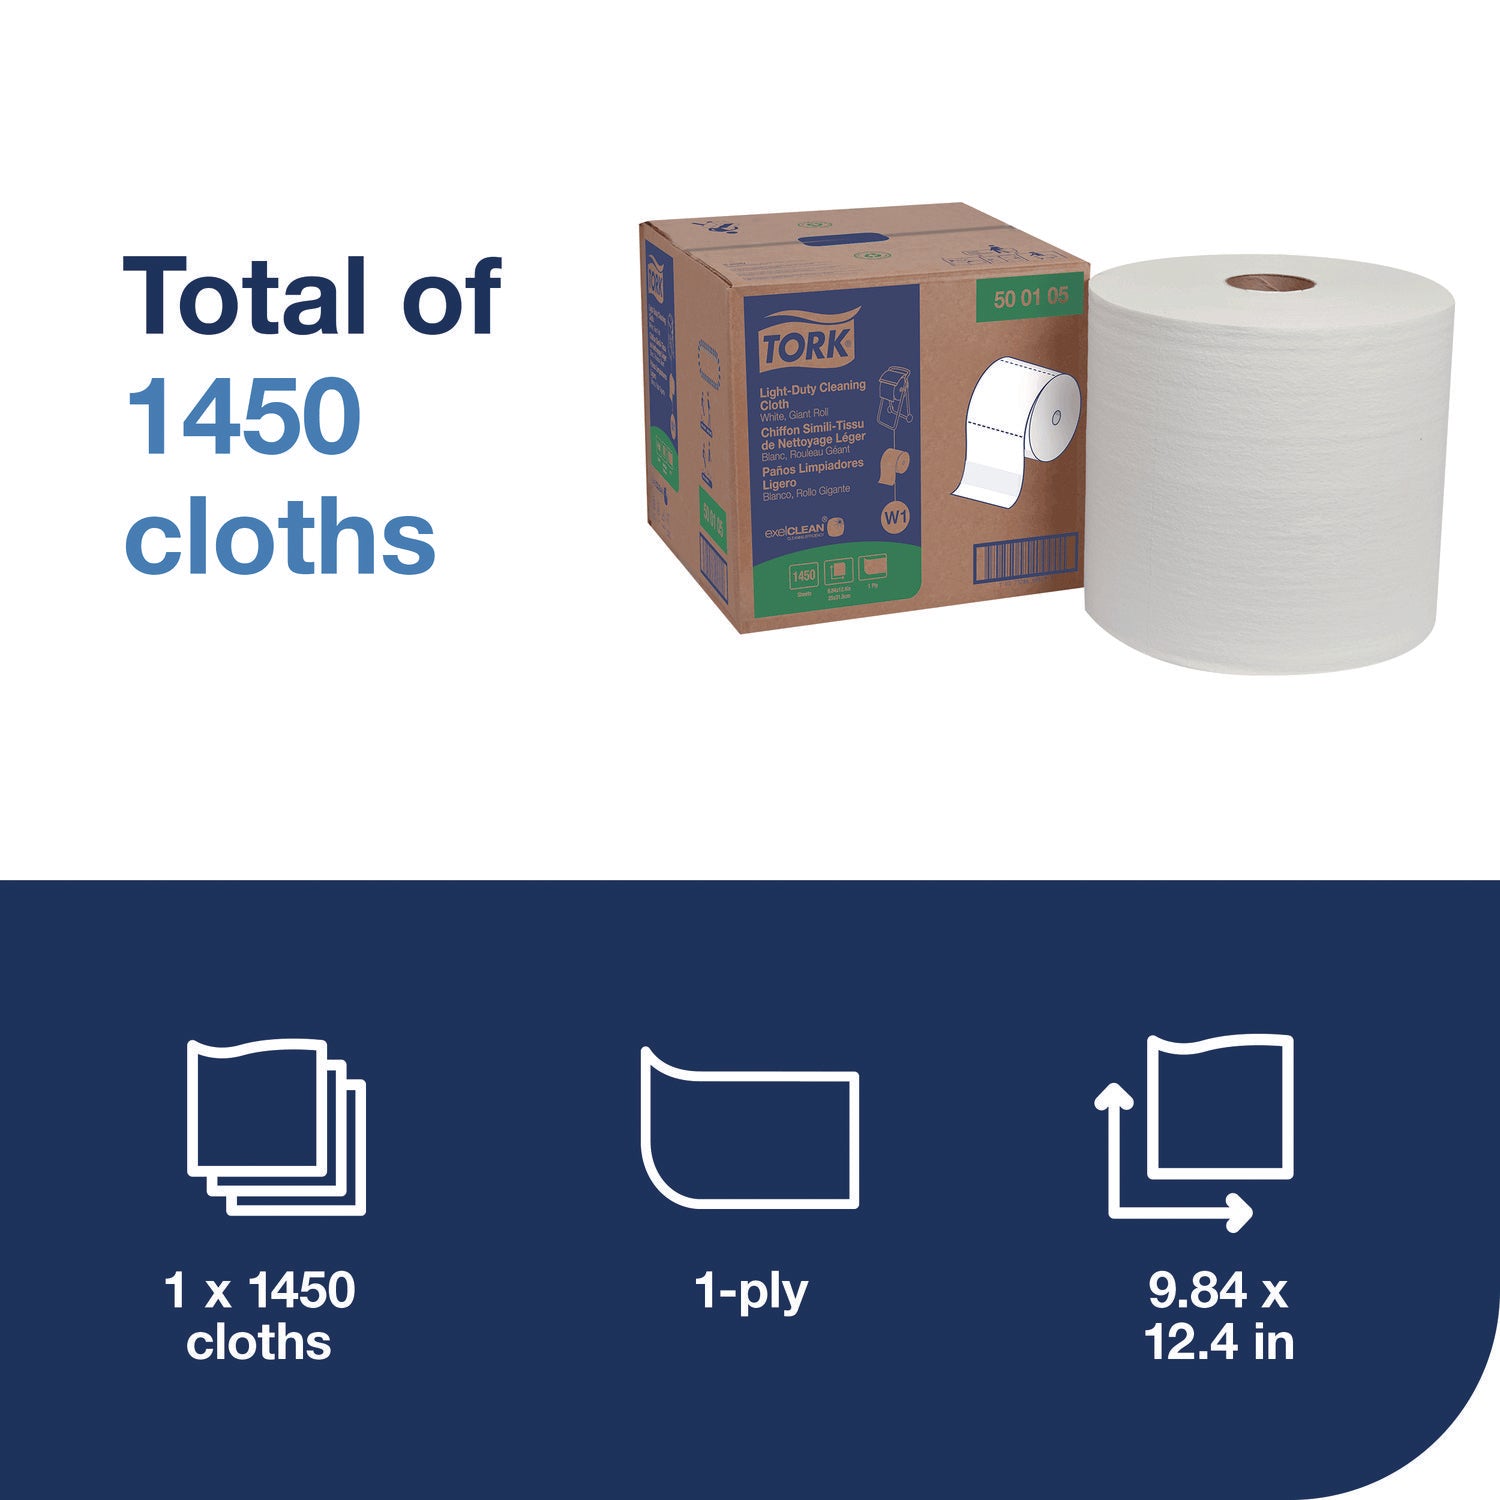 light-duty-cleaning-cloth-giant-roll-1-ply-9-x-124-white-1450-sheet-roll-carton_trk500105 - 2